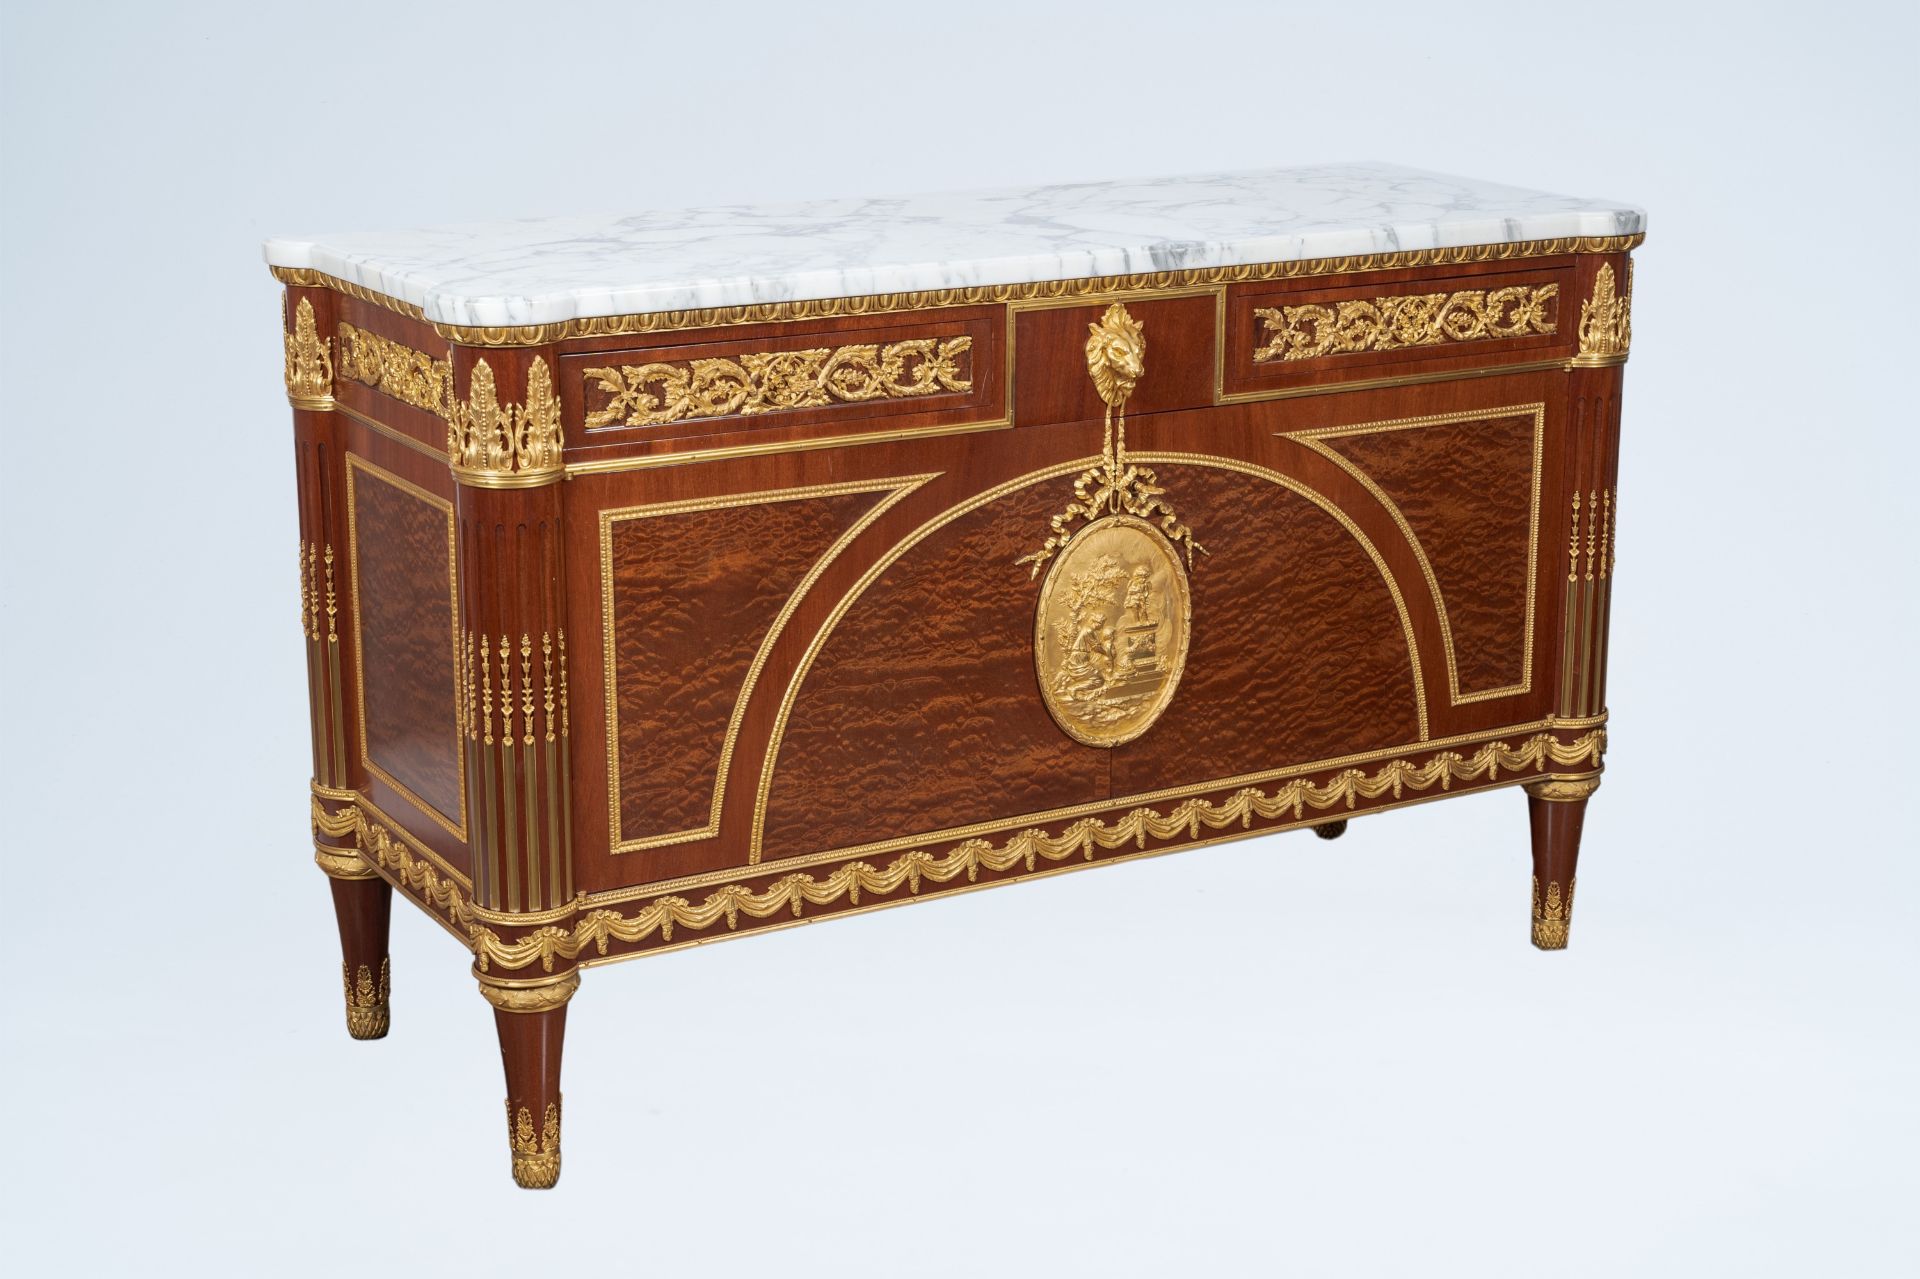 An impressive Neoclassical gilt bronze mounted wood chest of drawers with marble top, 20th C. - Bild 2 aus 10